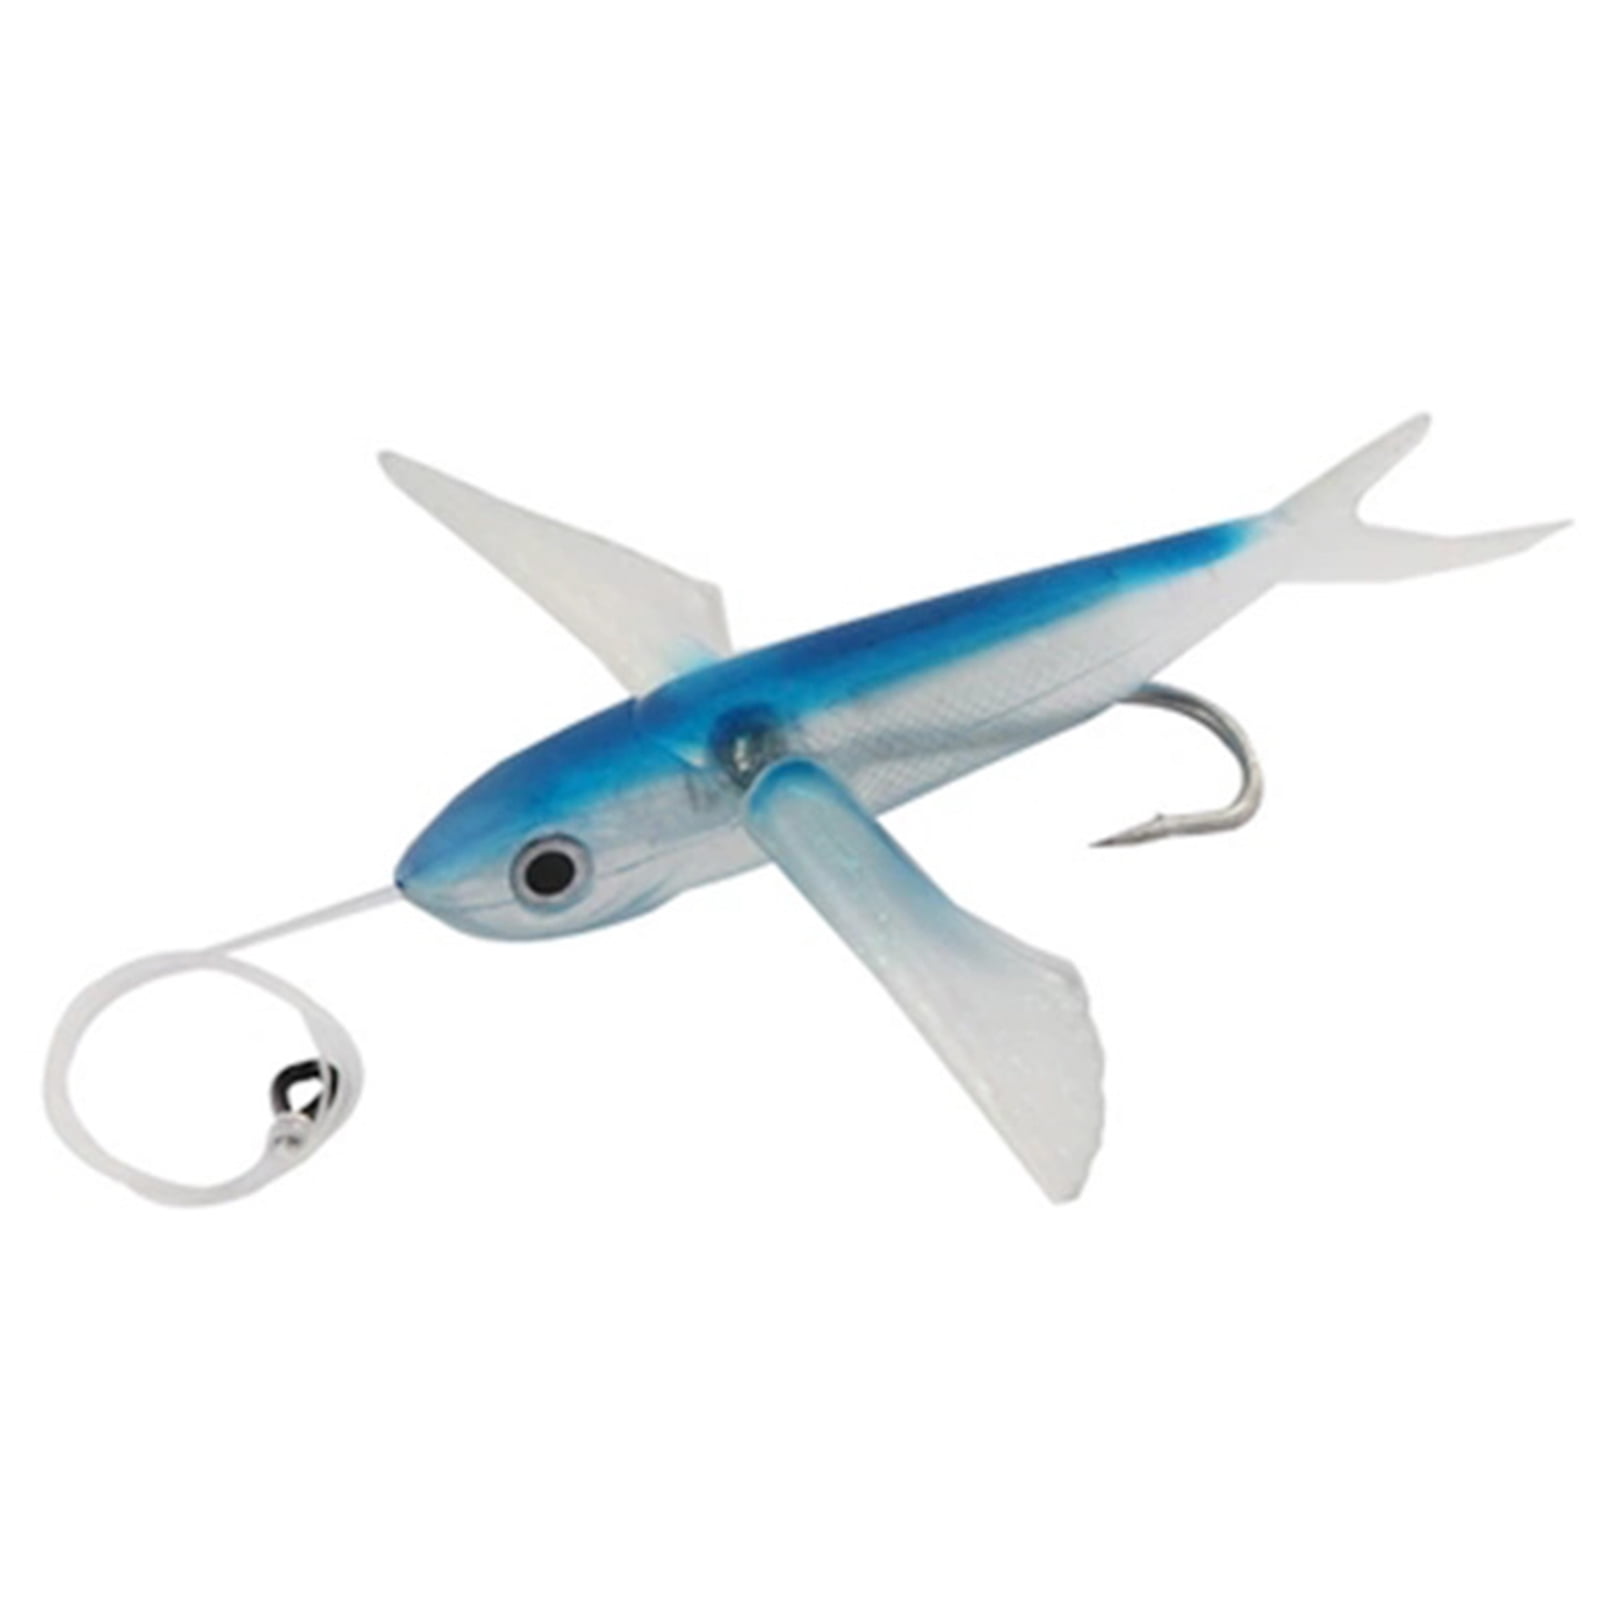 Flying Fish Artificial Bait Soft Tuna Lure Seawater Fishing Lure